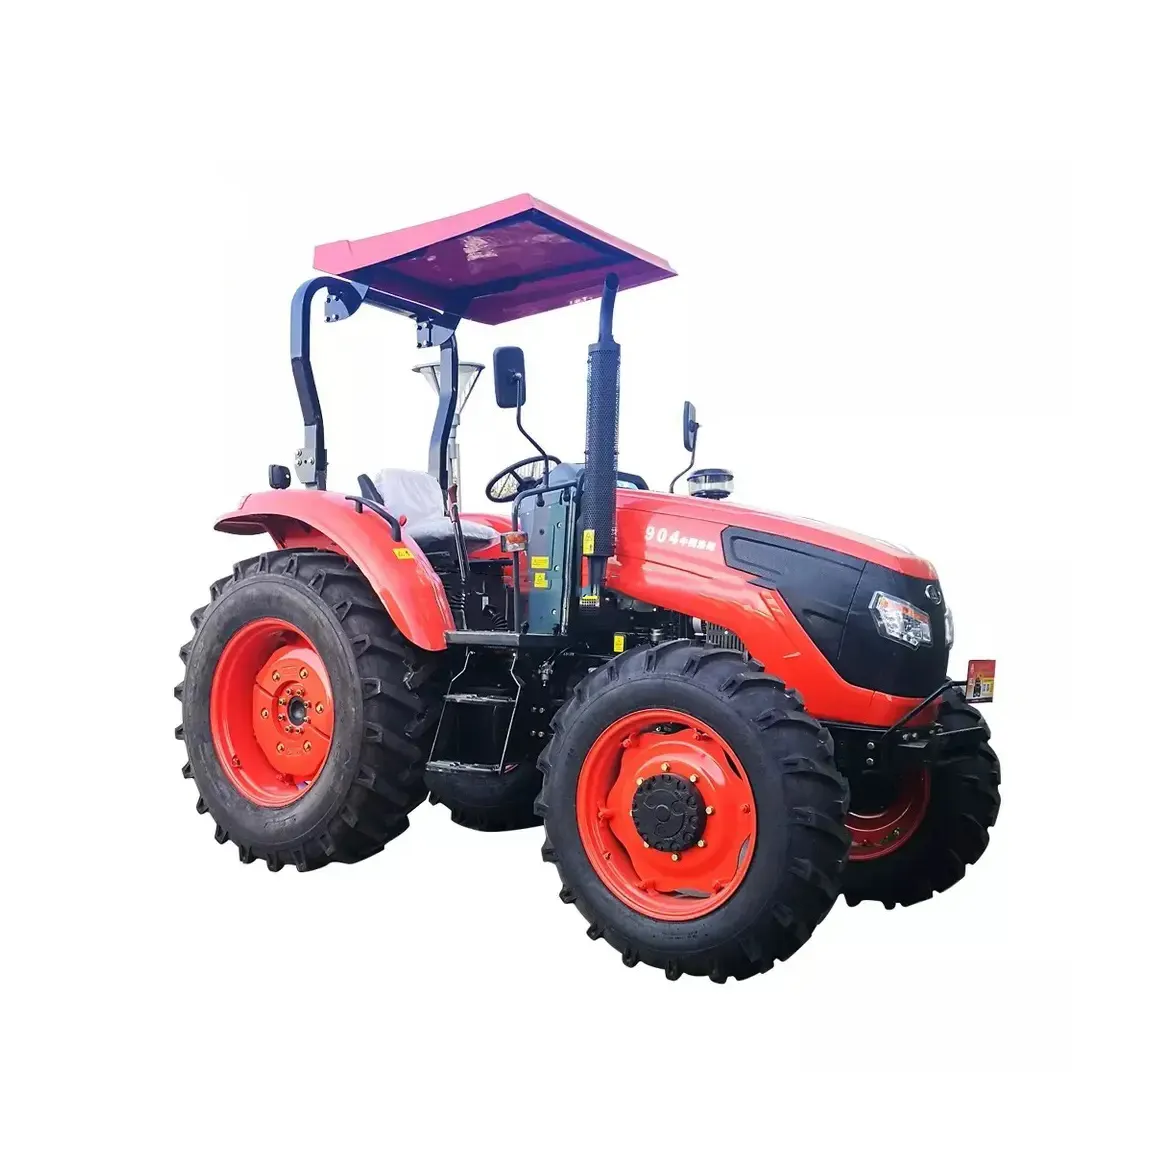 Tracteur d'occasion/neuf 110HP Agriculture 4WD Kubota à vendre